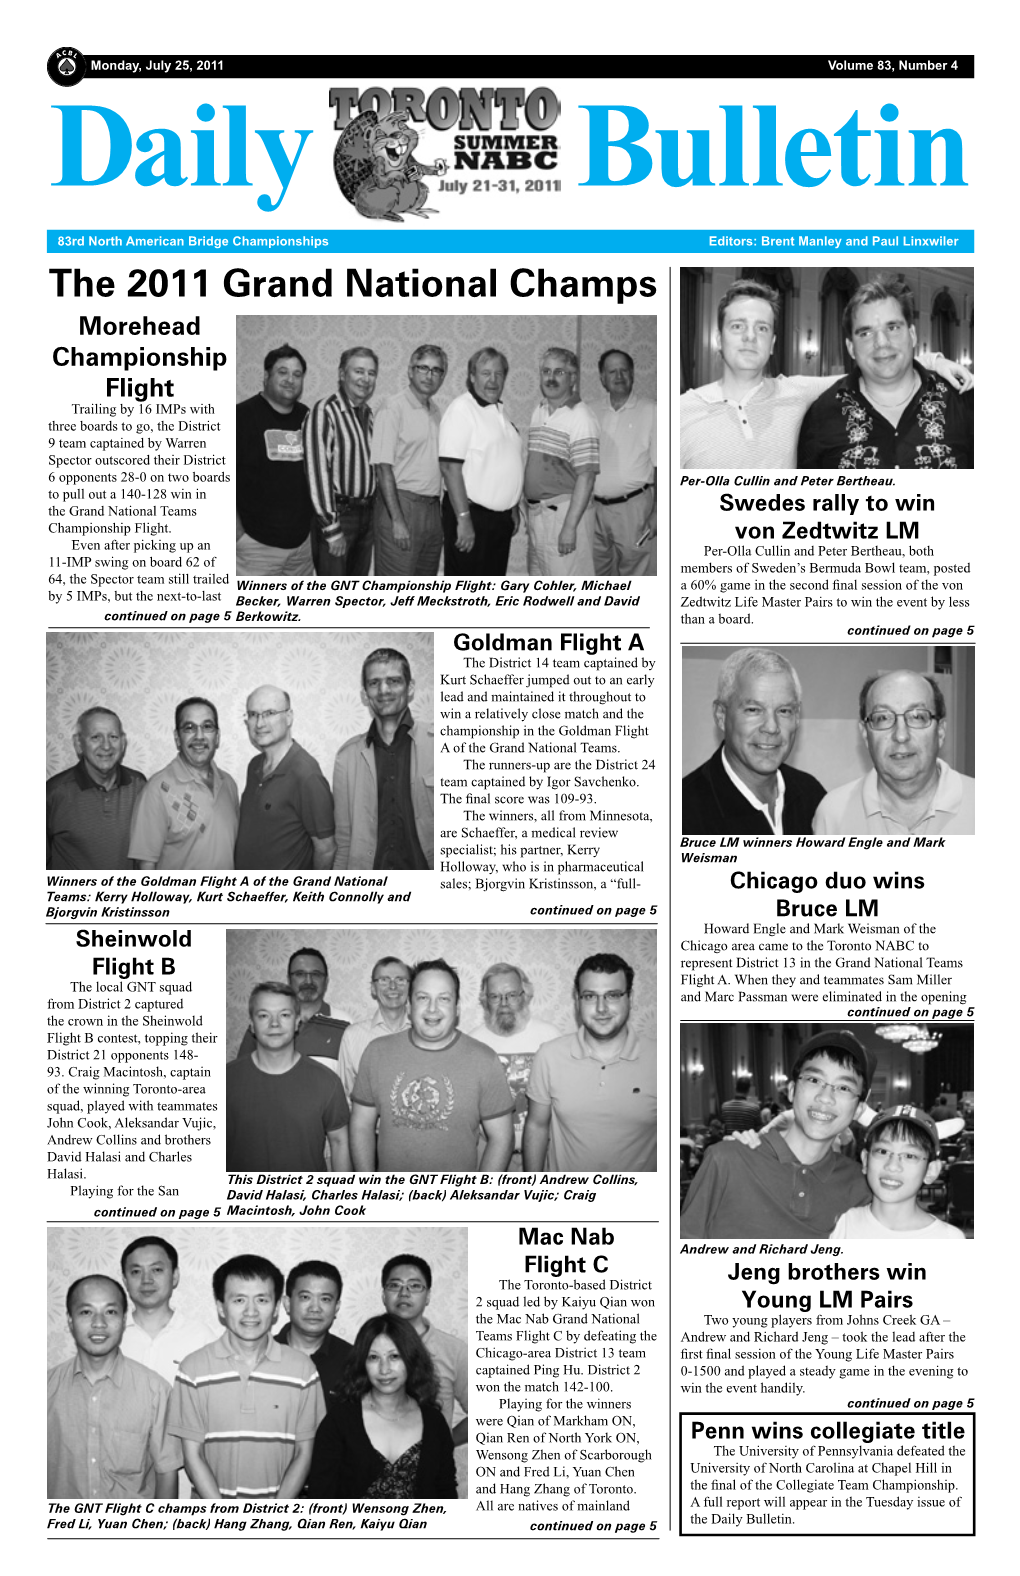 The 2011 Grand National Champs